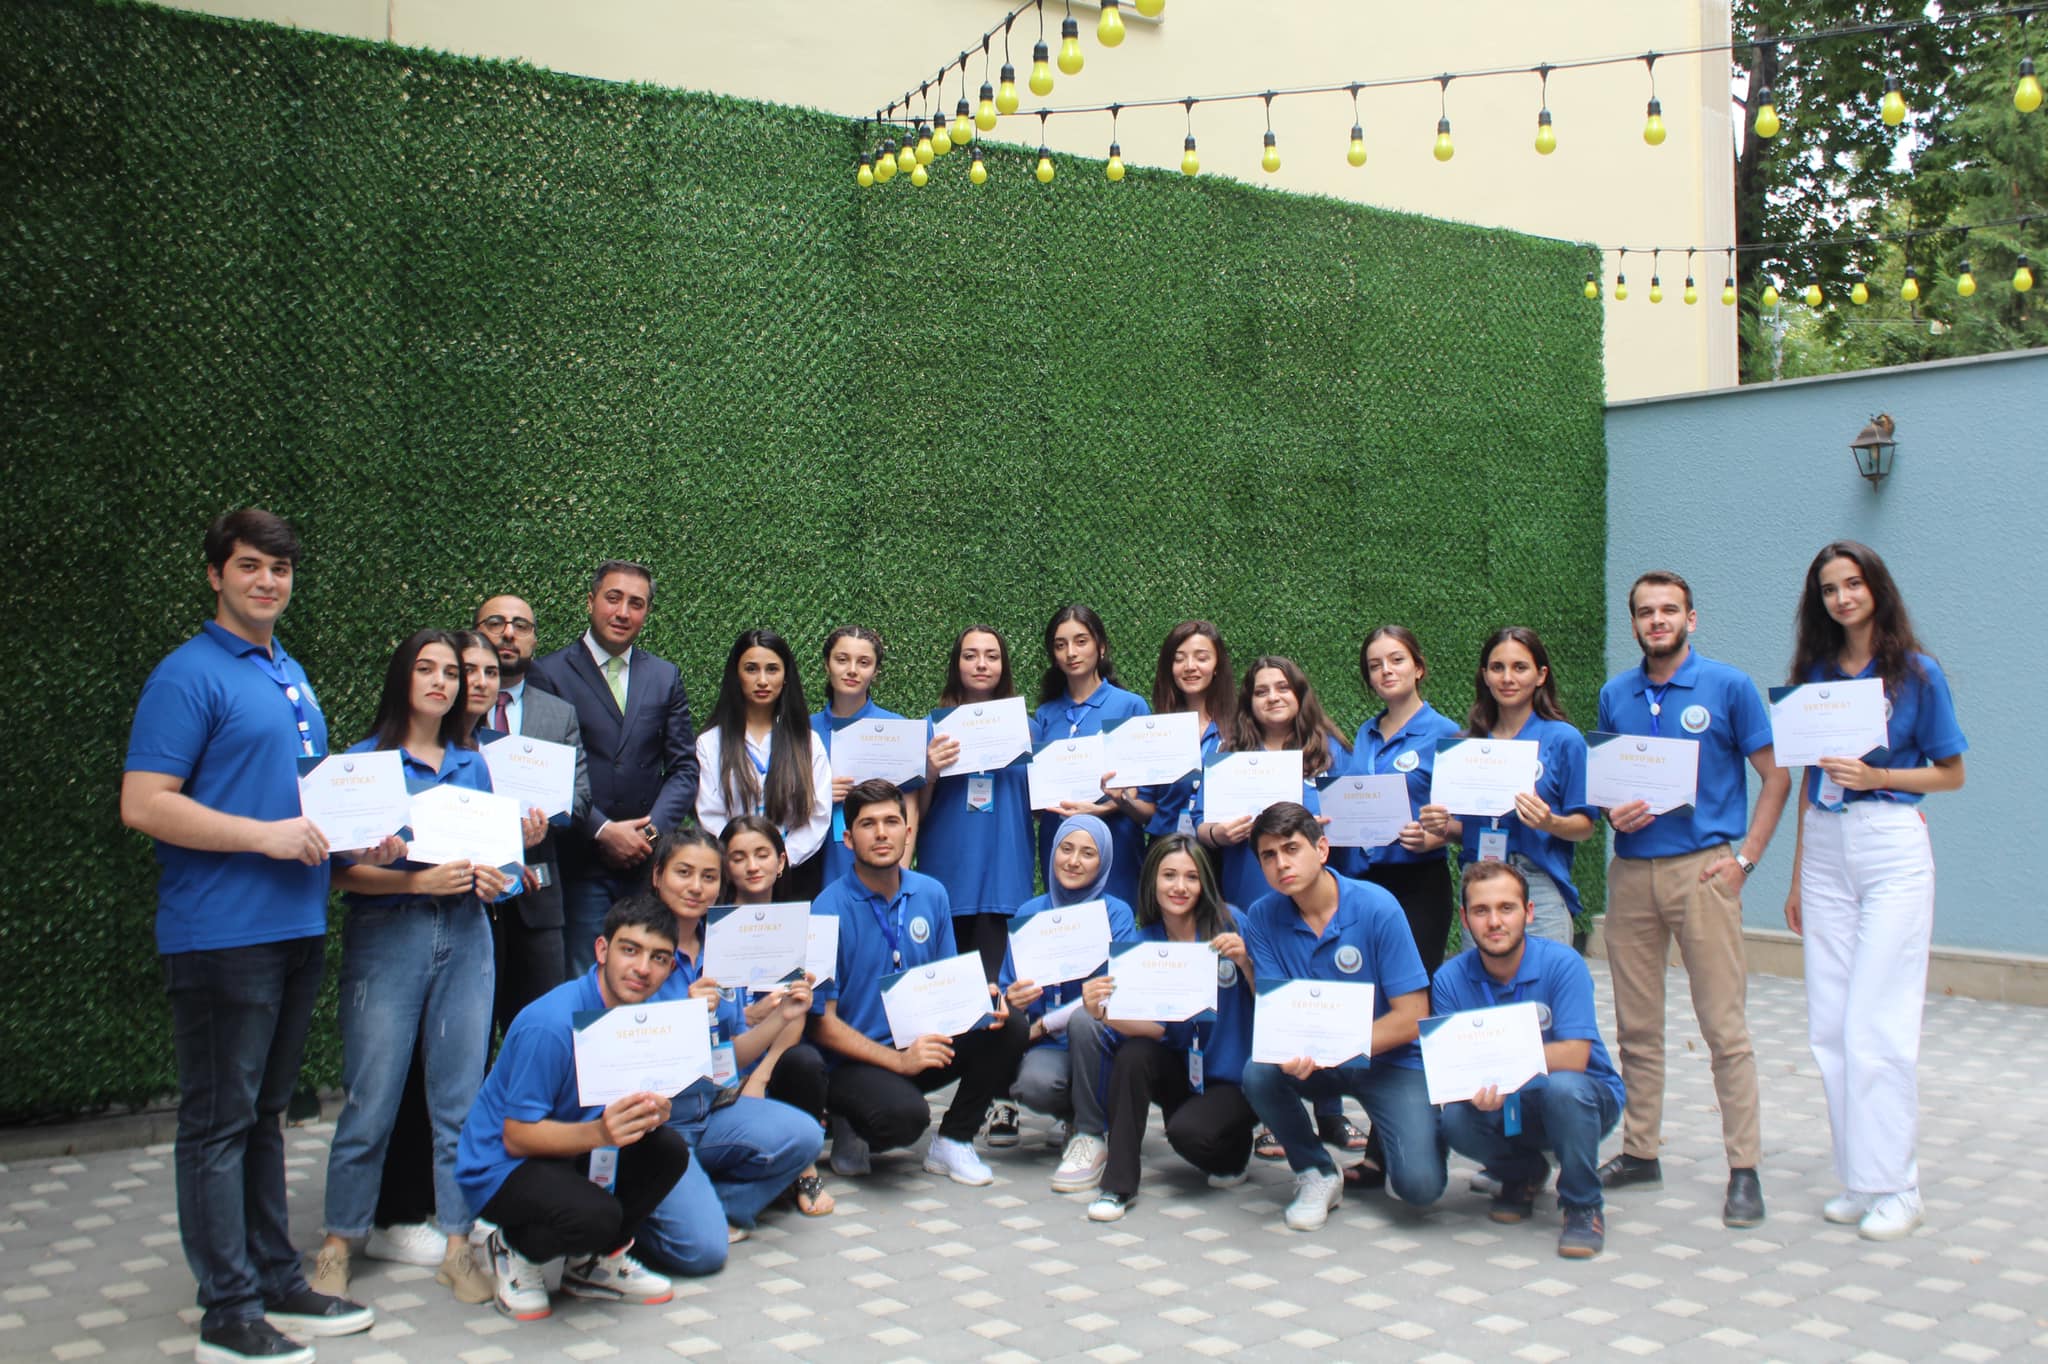 The award ceremony was held for the participants of the Summer Training Program 